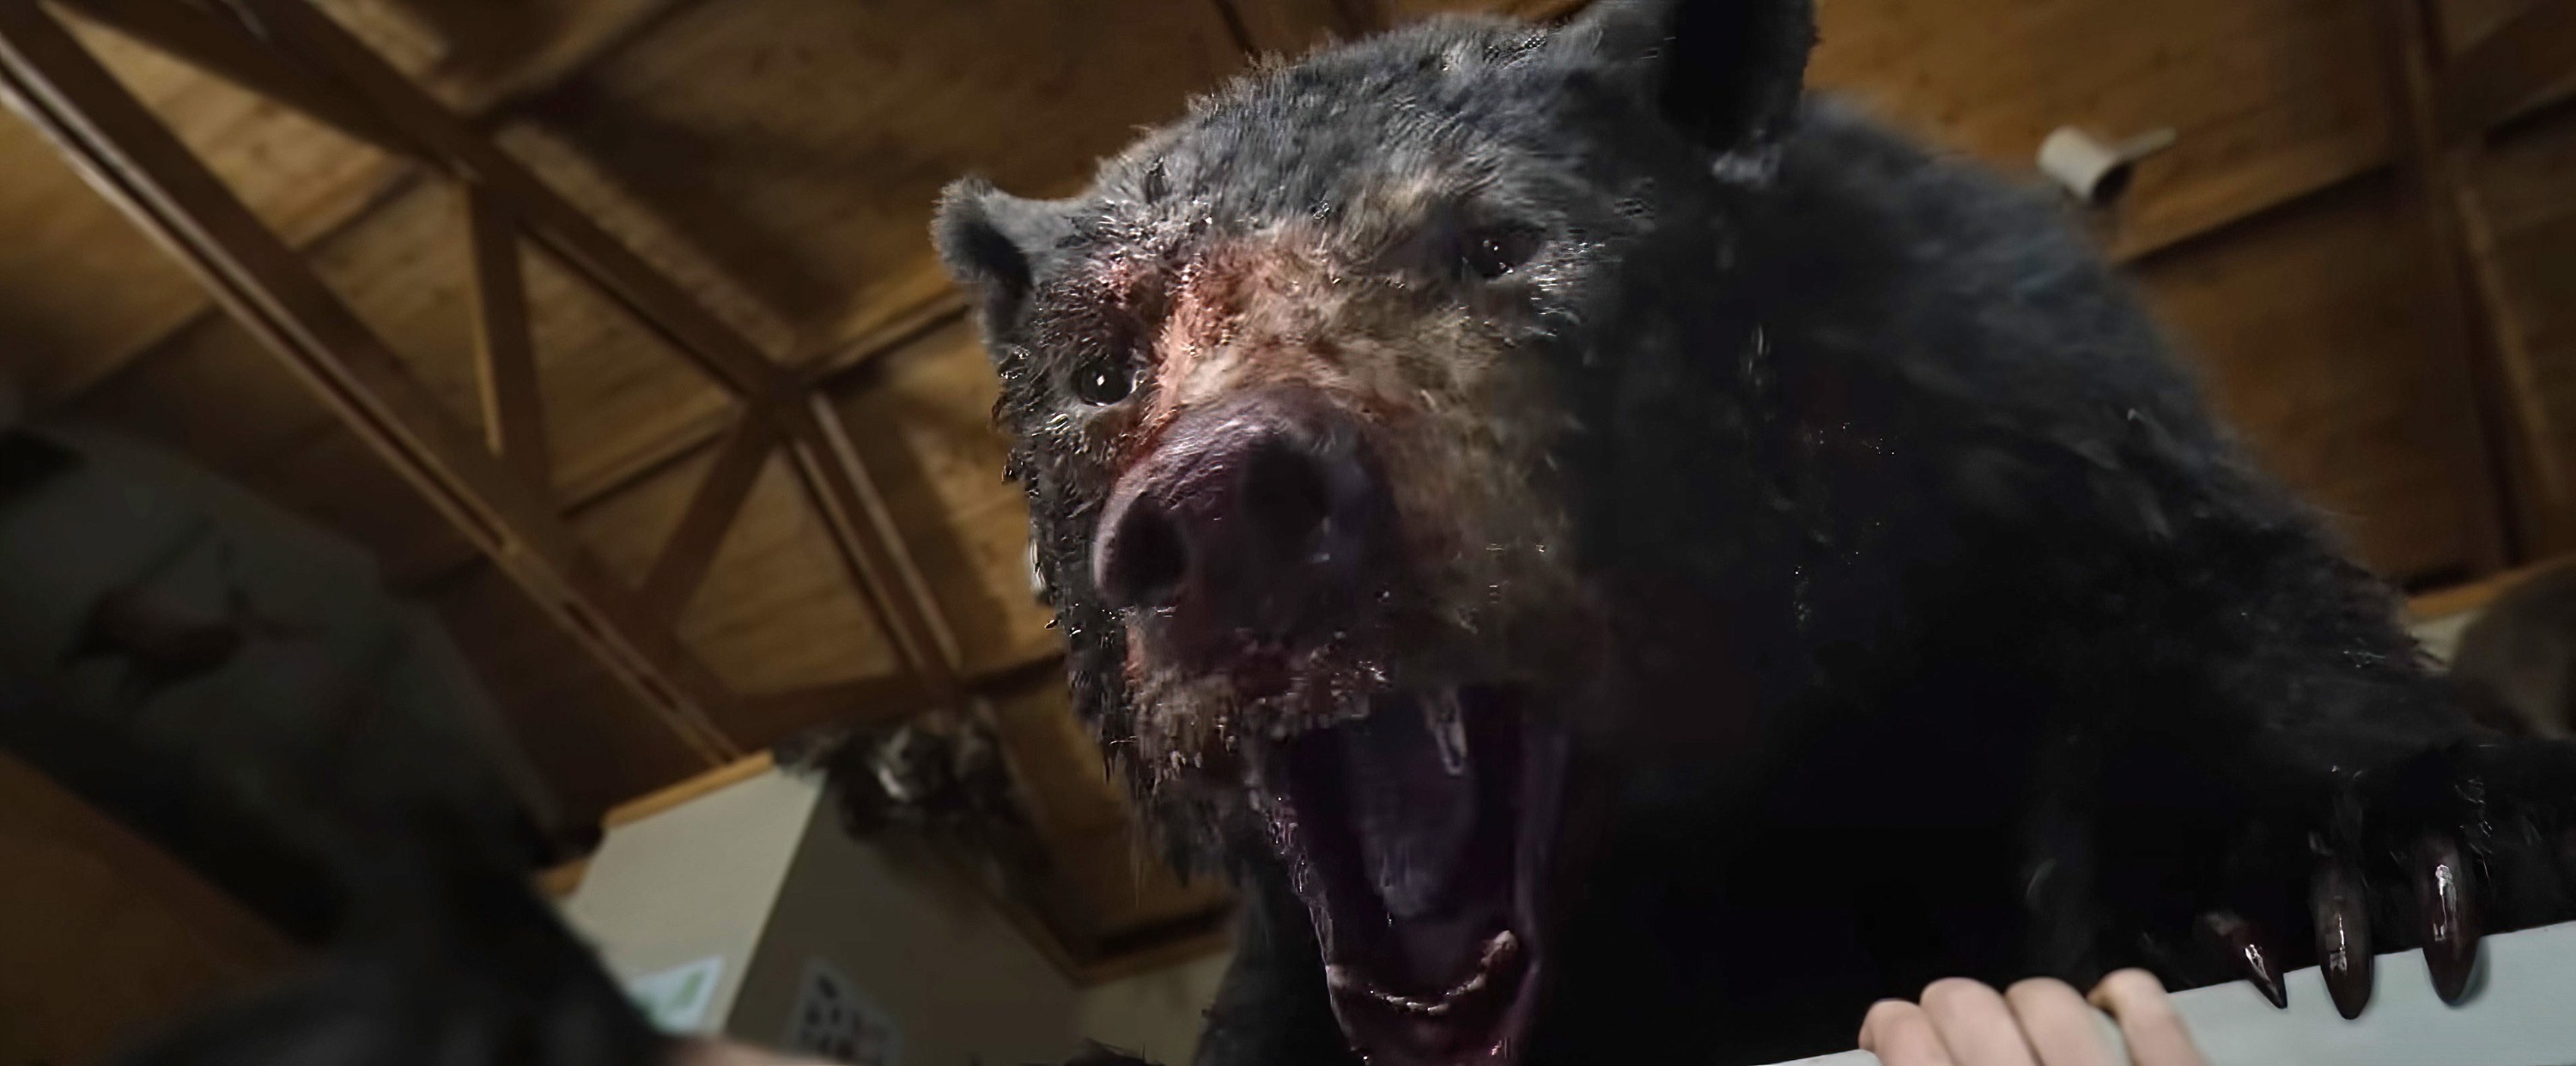 Close-up of bear covered in blood